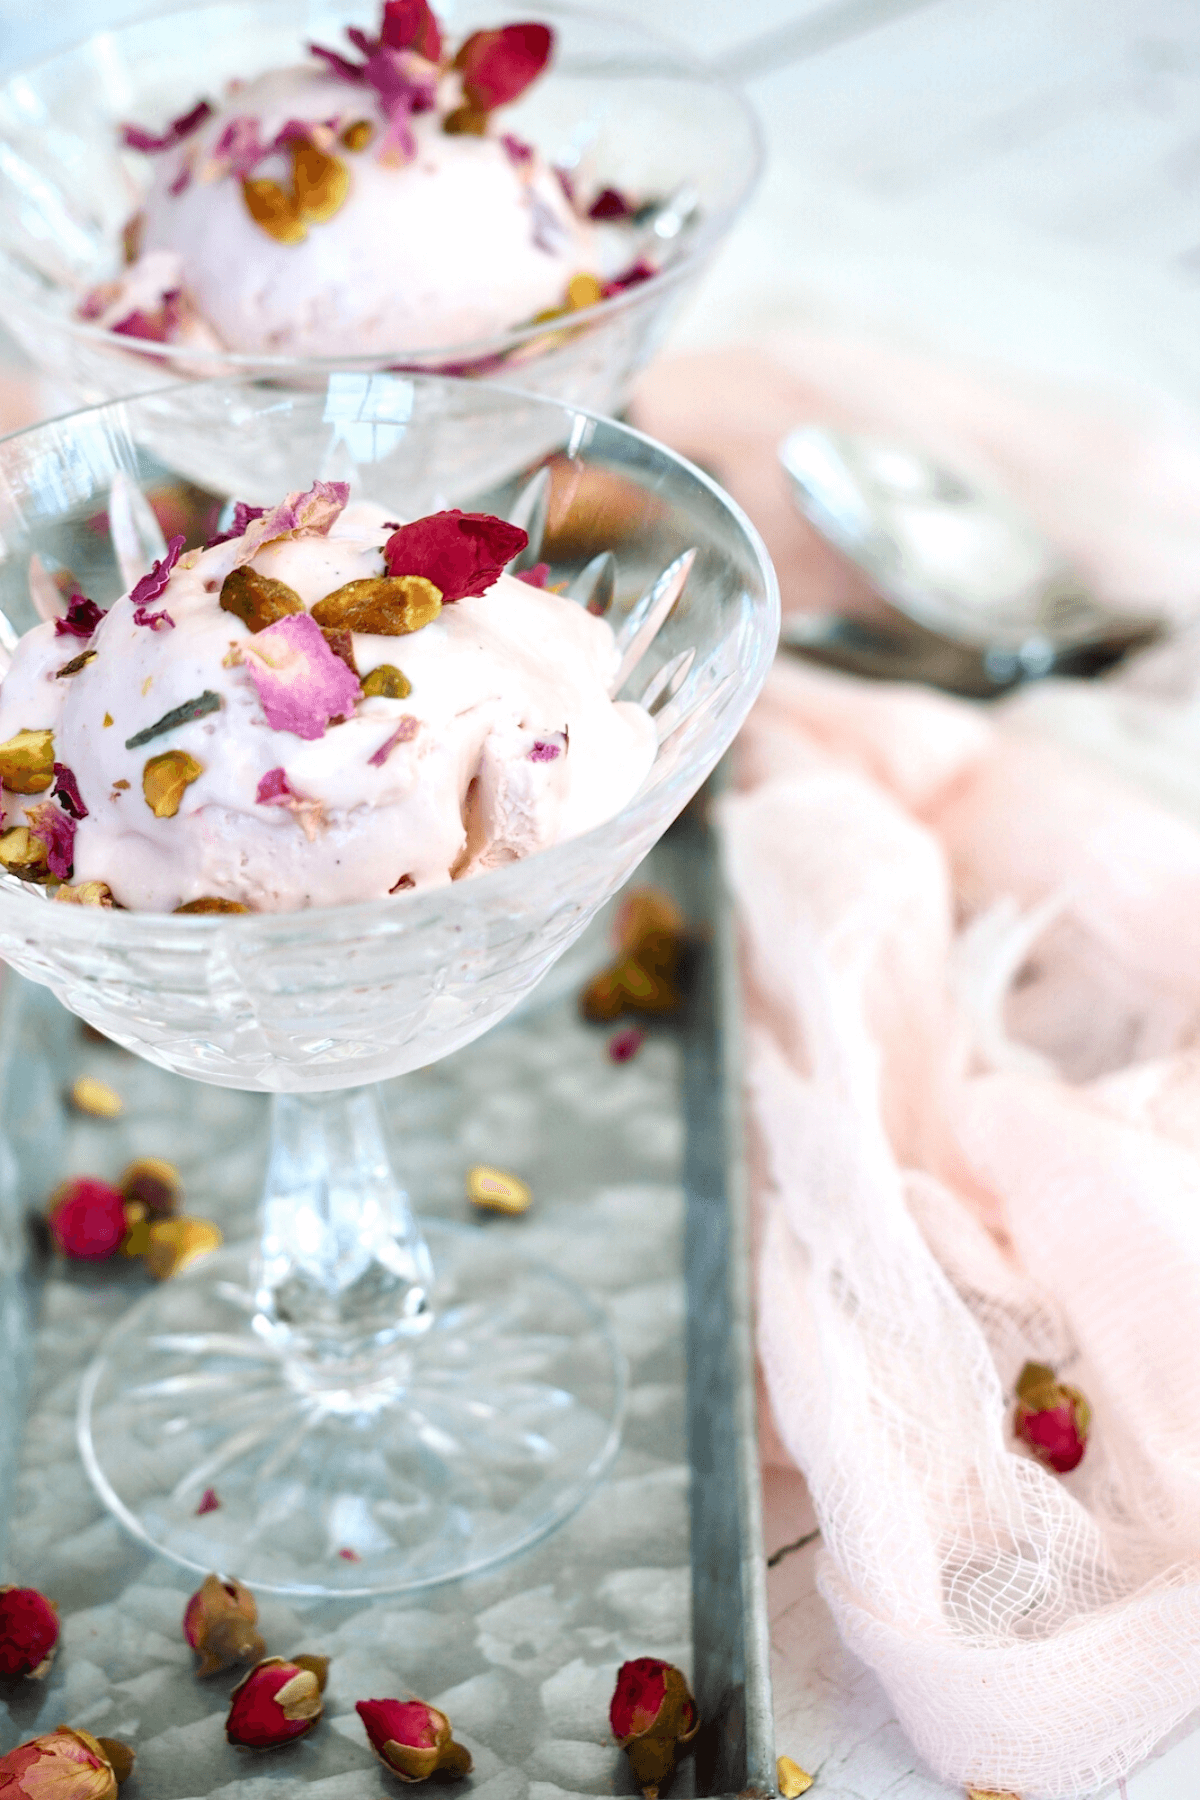 Rose ice cream in cut crystal glasses garnished with pistachios and rose petals on a pretty galvanized tray.